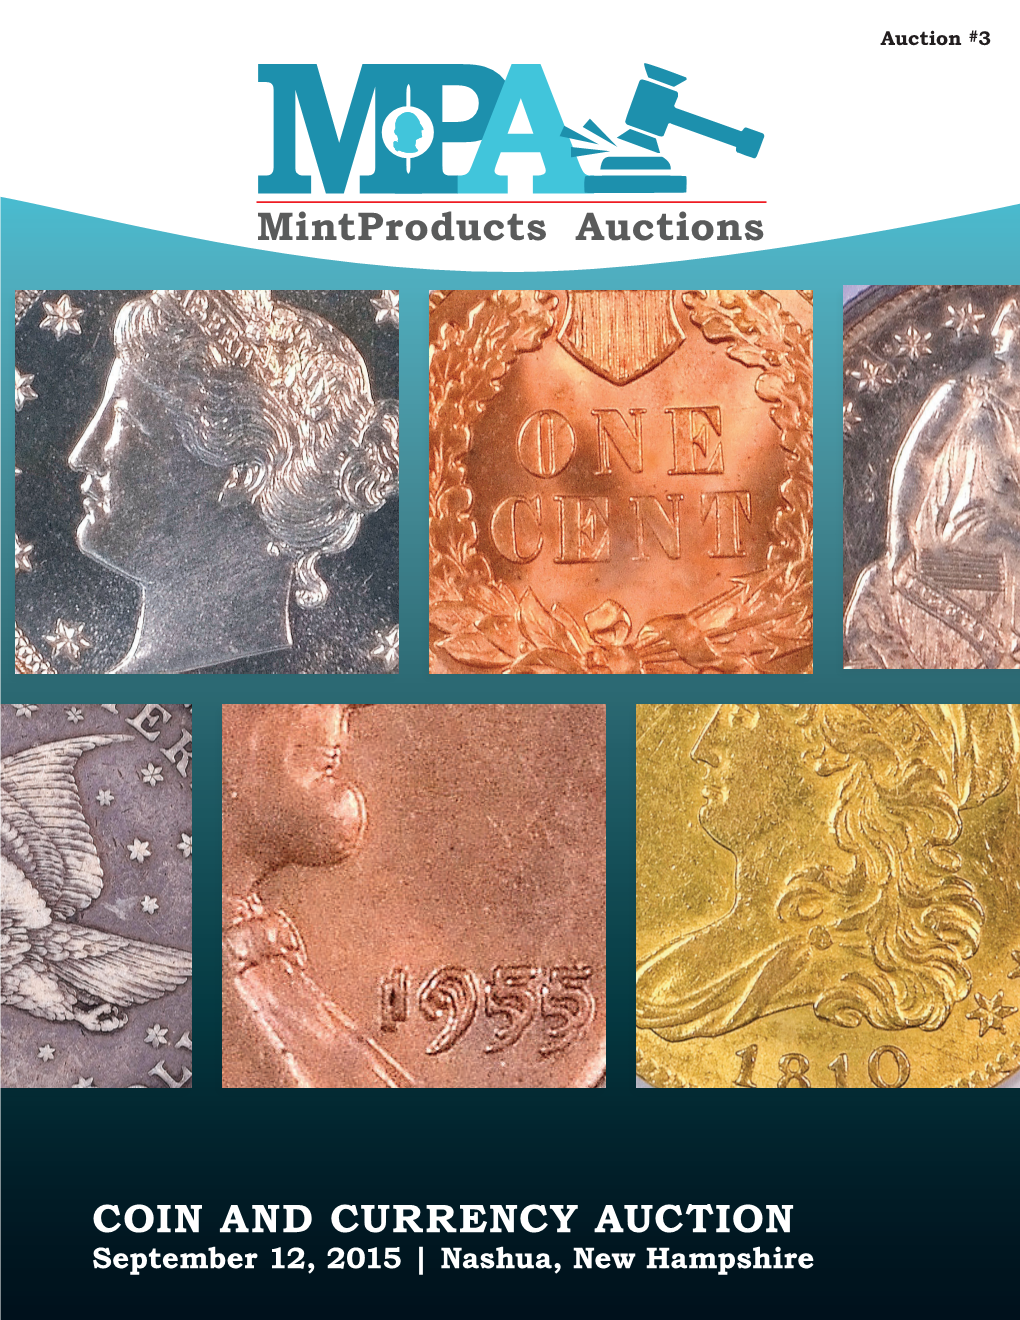 Mintproducts Auctions COIN and CURRENCY AUCTION